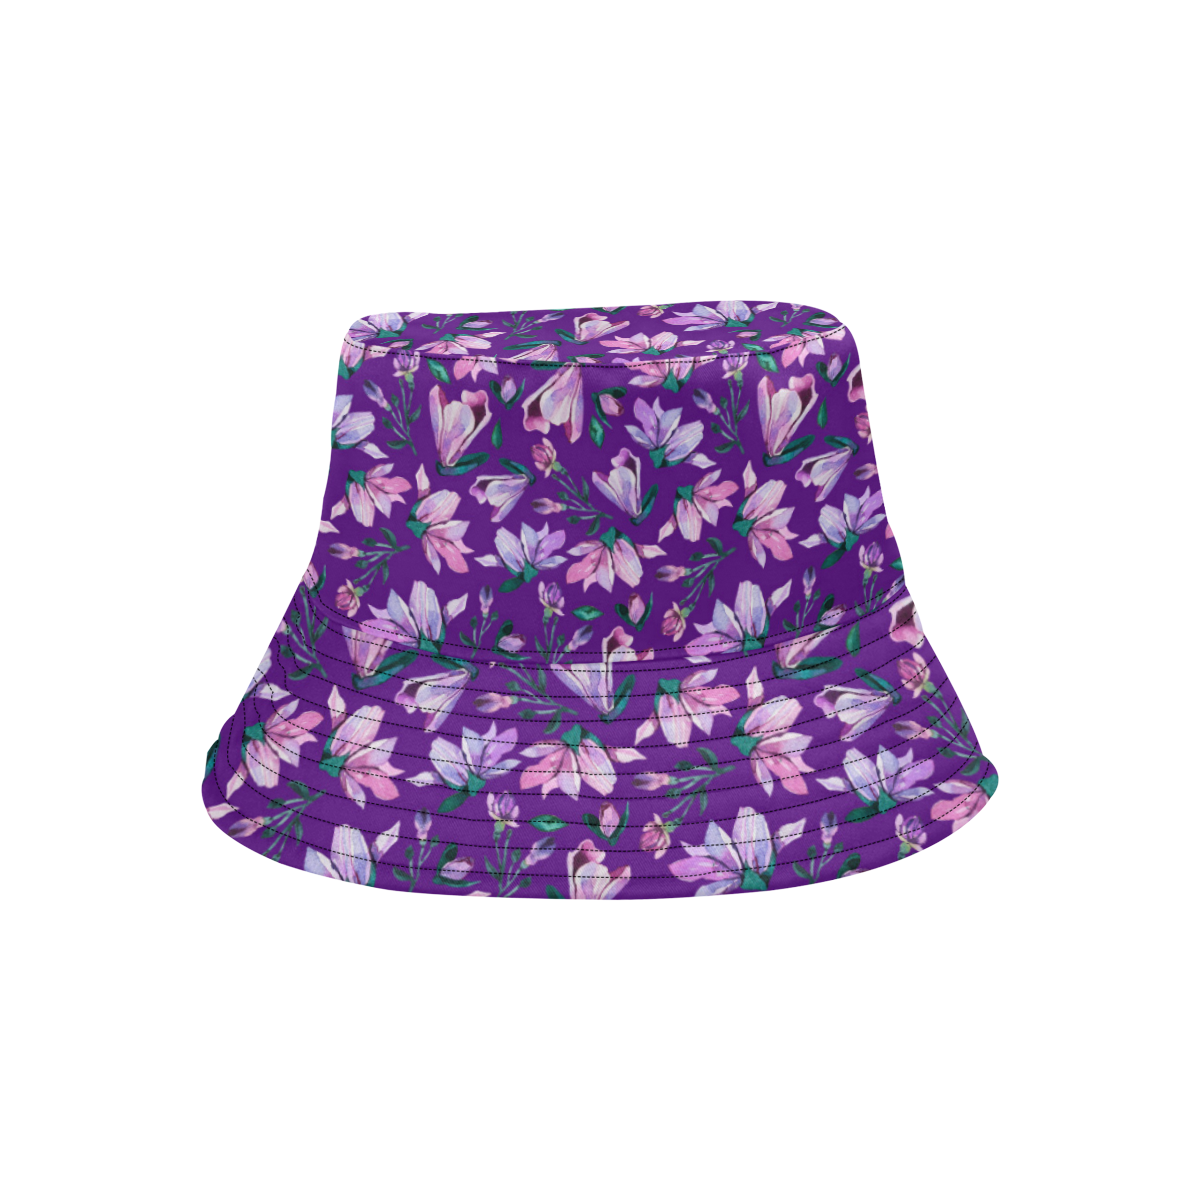 Purple Spring All Over Print Bucket Hat